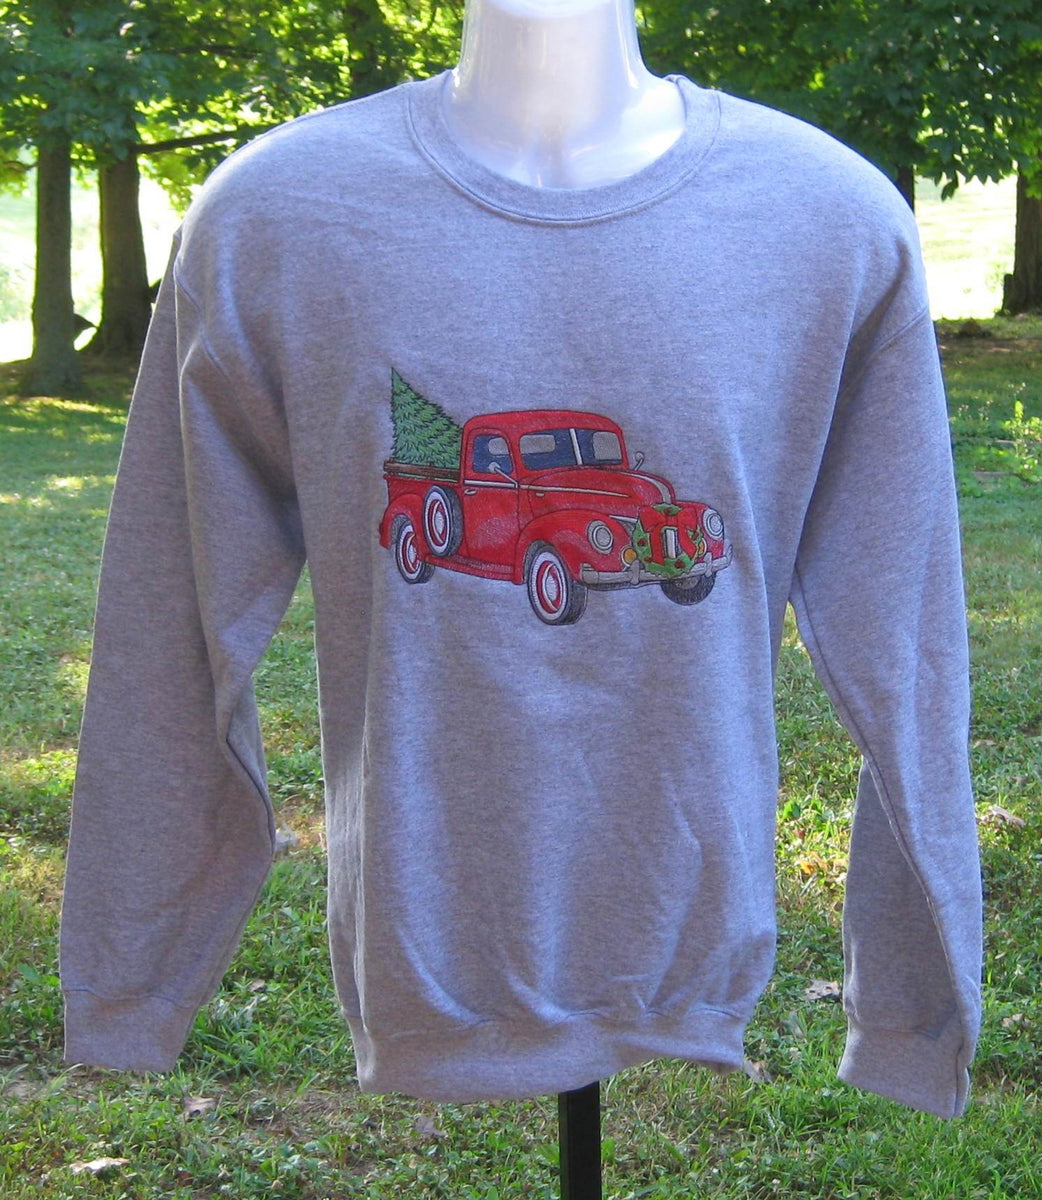 Truck and Tree sweatshirt – Stitched with Family Ties